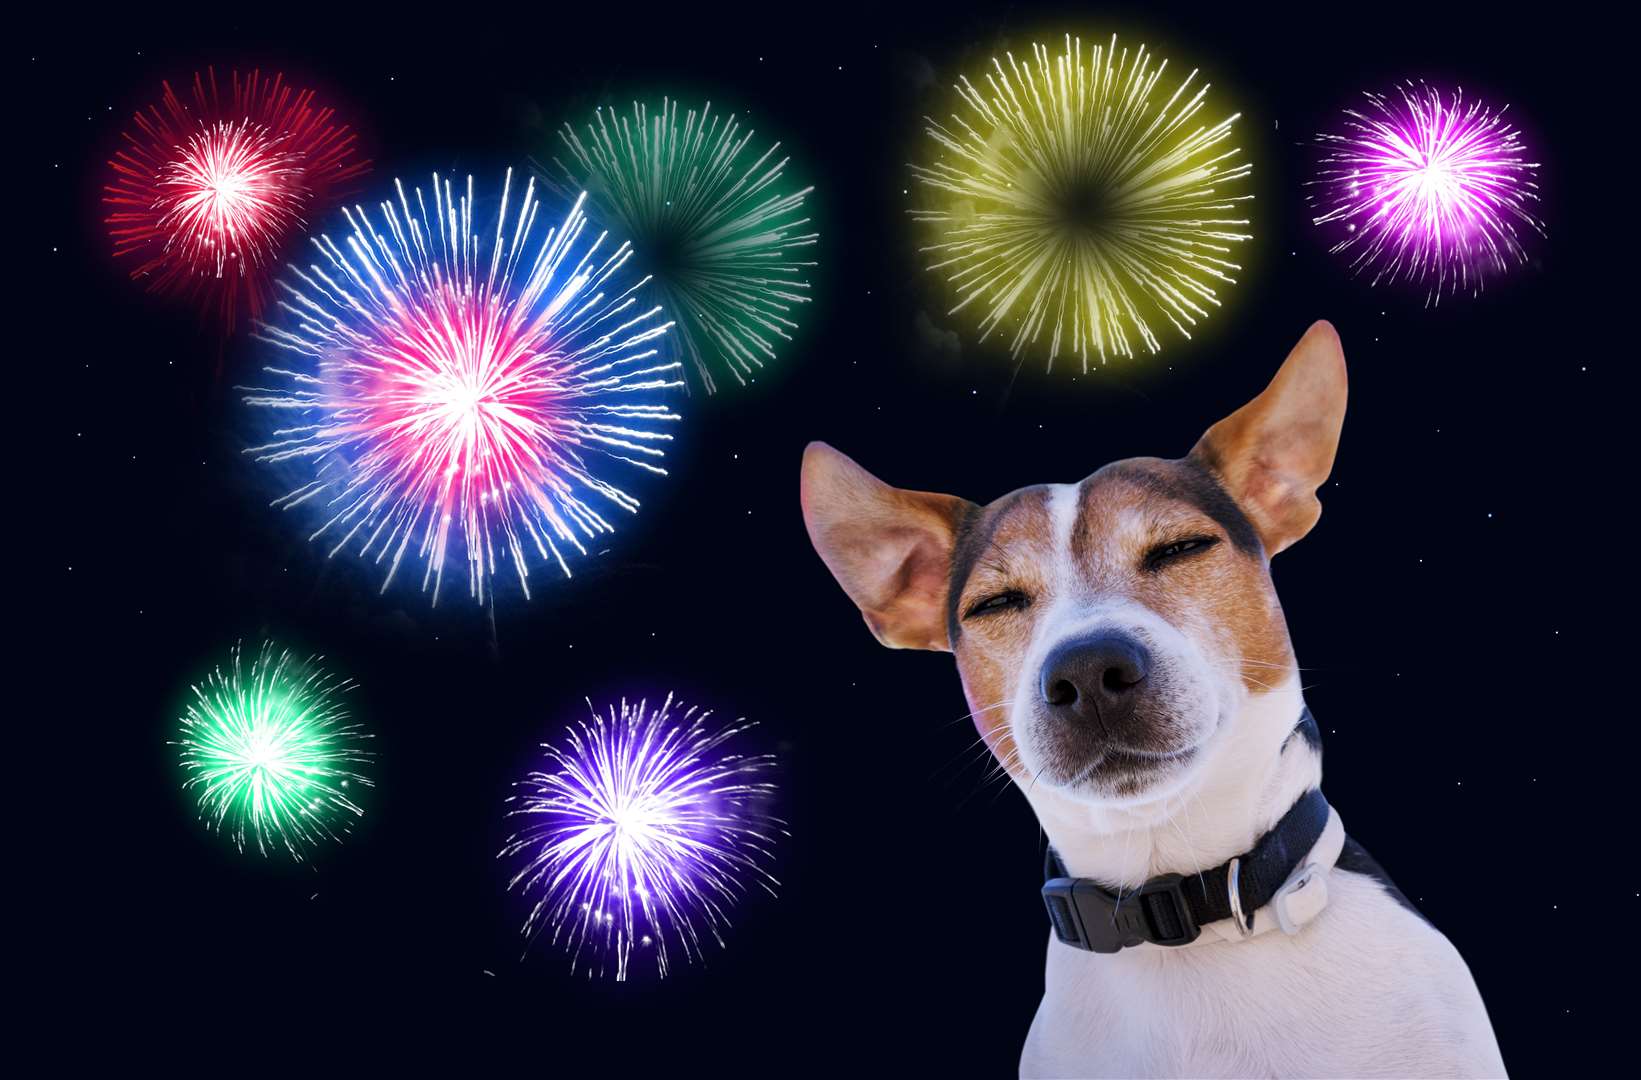 A few simple measures could help your pet deal with any new year fireworks.